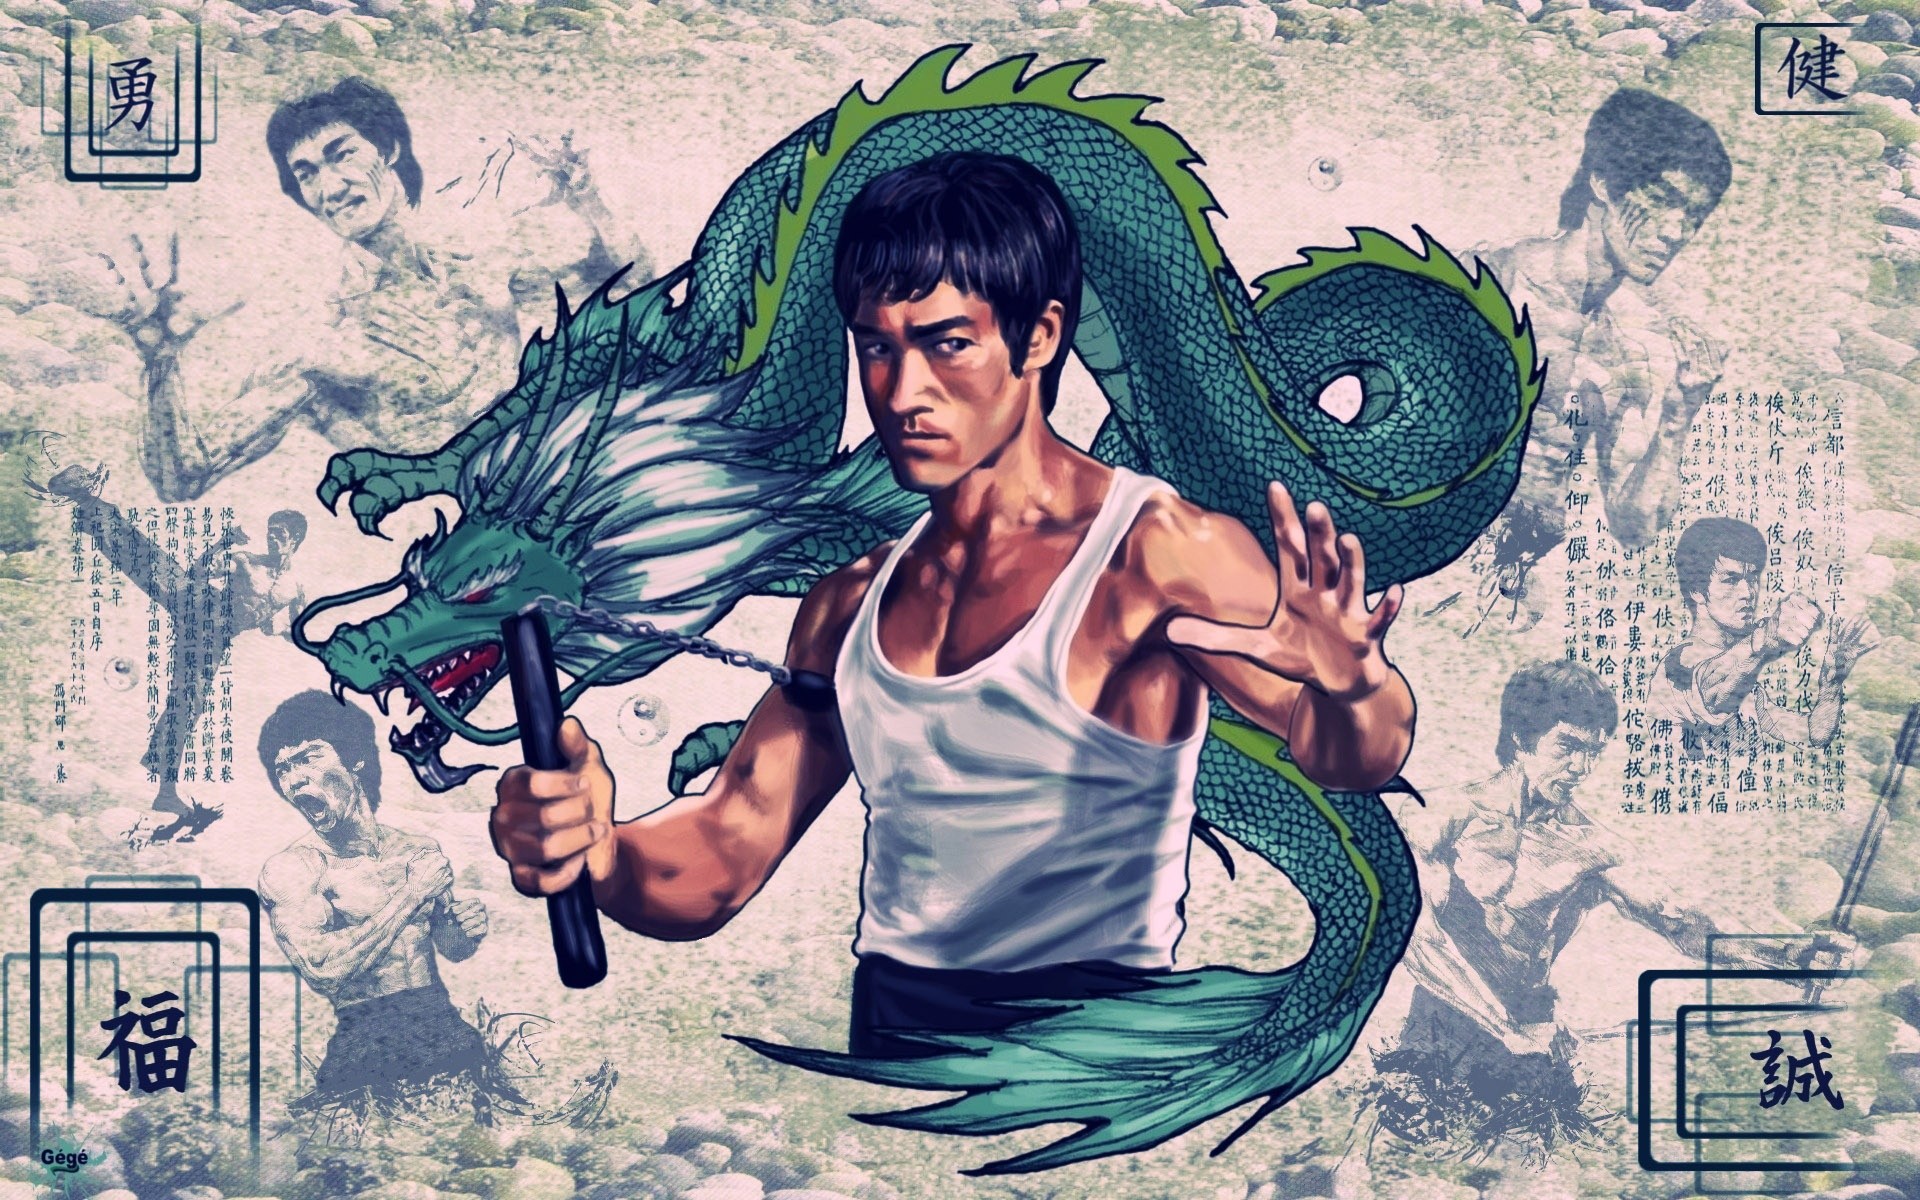 Bruce lee dragons vintage poster chinese wallpaper 1920x1200 9054